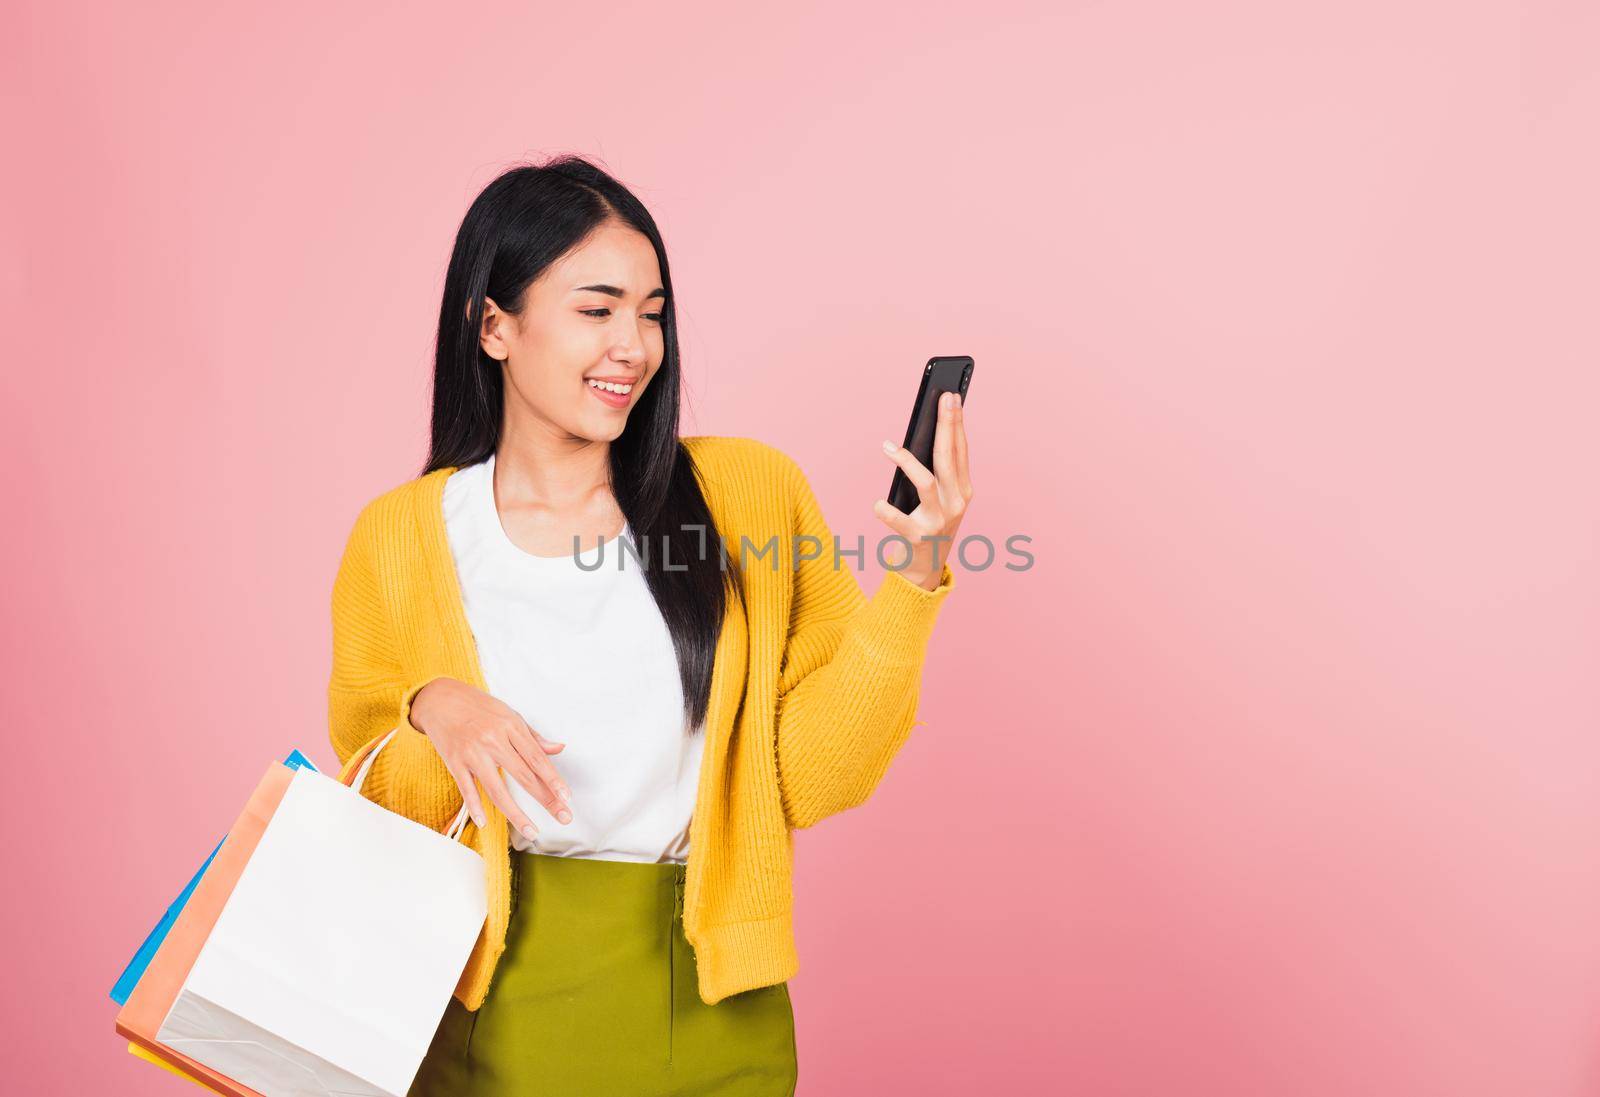 Portrait Asian happy beautiful young woman teen shopper smiling standing excited holding online shopping bags online colorful multicolor and smartphone on hand, studio shot isolated on pink background